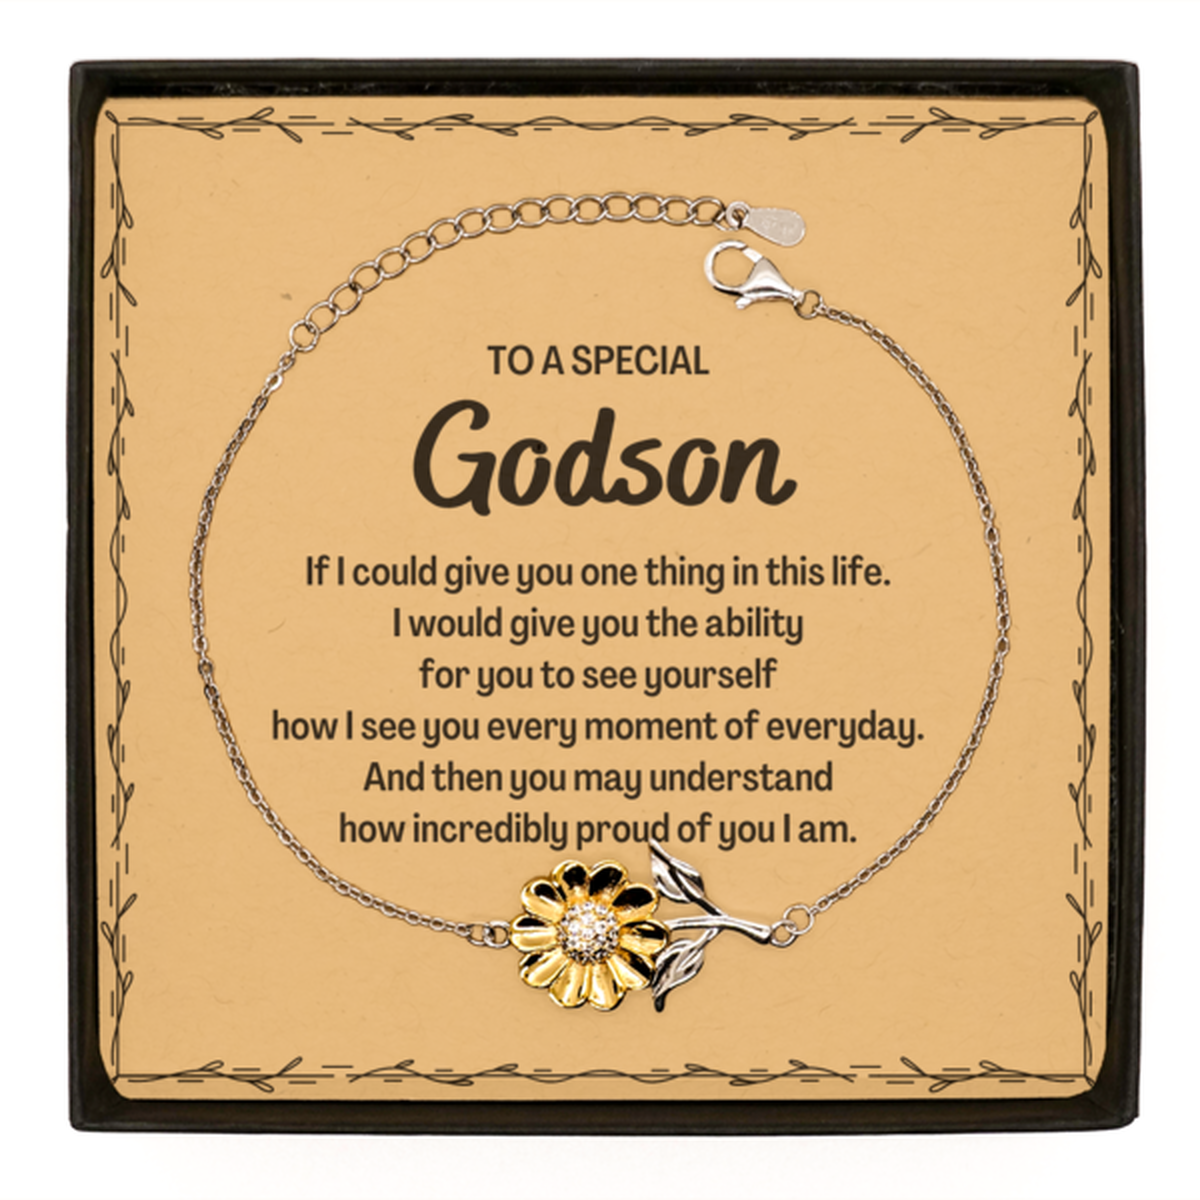 To My Godson Sunflower Bracelet, Gifts For Godson Message Card, Inspirational Gifts for Christmas Birthday, Epic Gifts for Godson To A Special Godson how incredibly proud of you I am